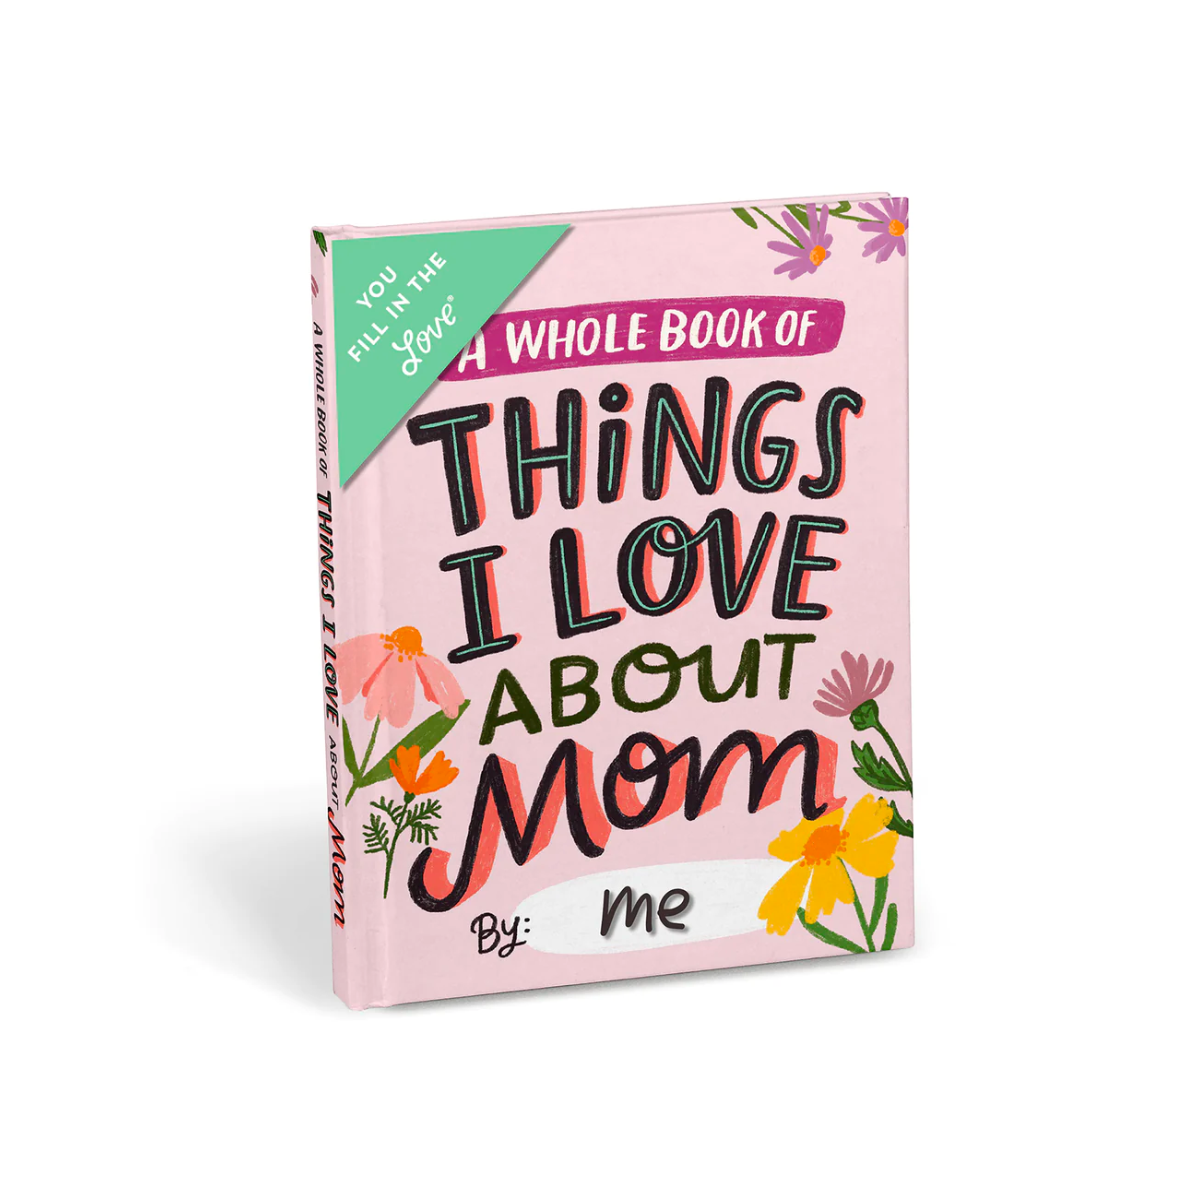 Love About Mom Fill in the Love® Book